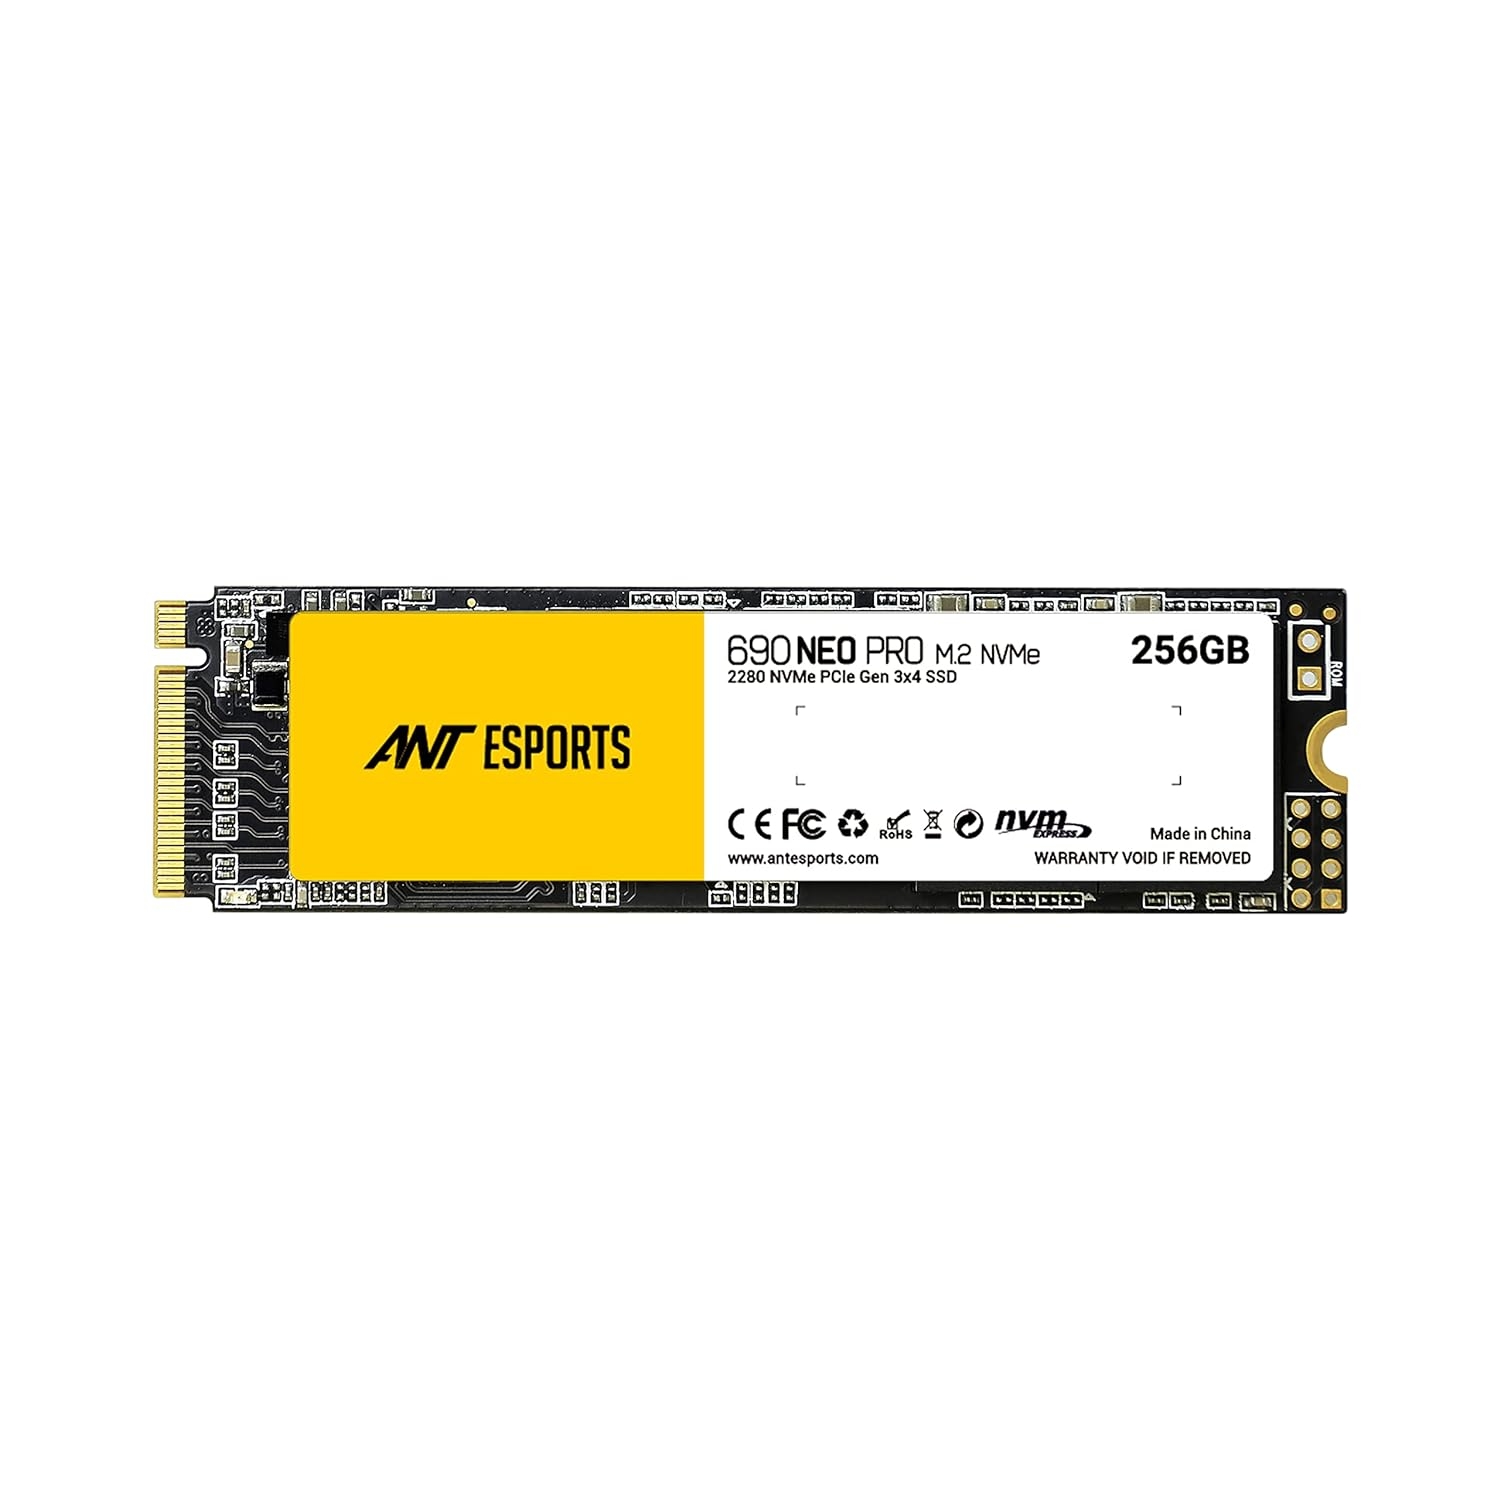 Ant Esports 690 Neo Pro M.2 NVME 256GB Internal Solid State Drive/SSD with NMVE PCIe Gen3x4 Drive Supporting The PCI Express 3.1, speeds Upto Read/Write - 3100/1800 MB/s Compatible with PC and Laptop